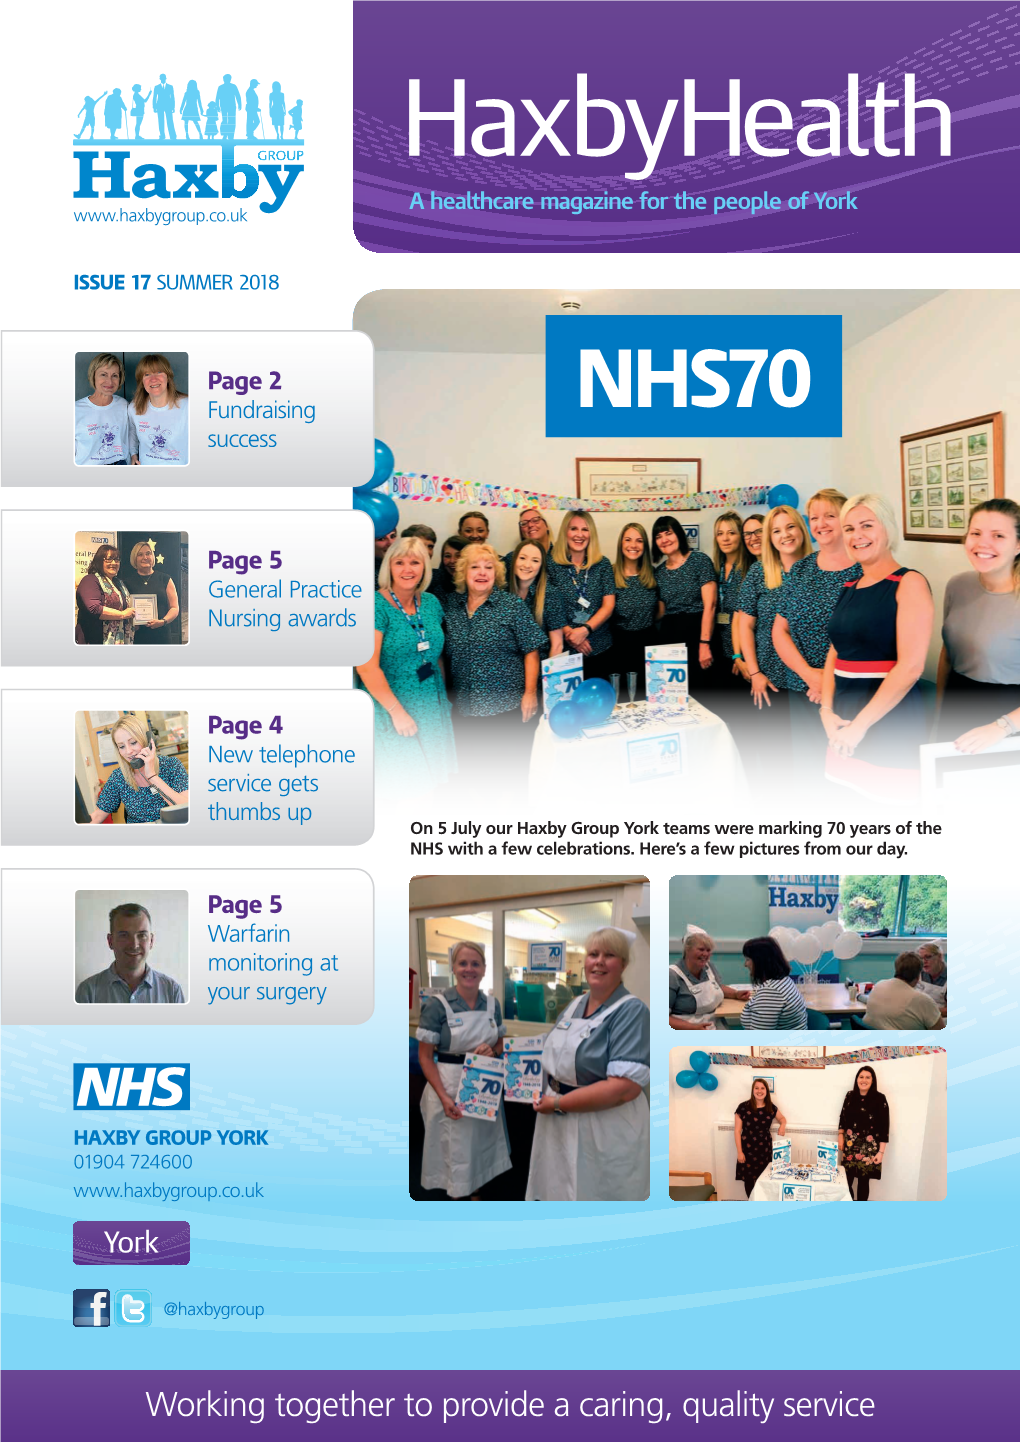 Haxbyhealth a Healthcare Magazine for the People of York